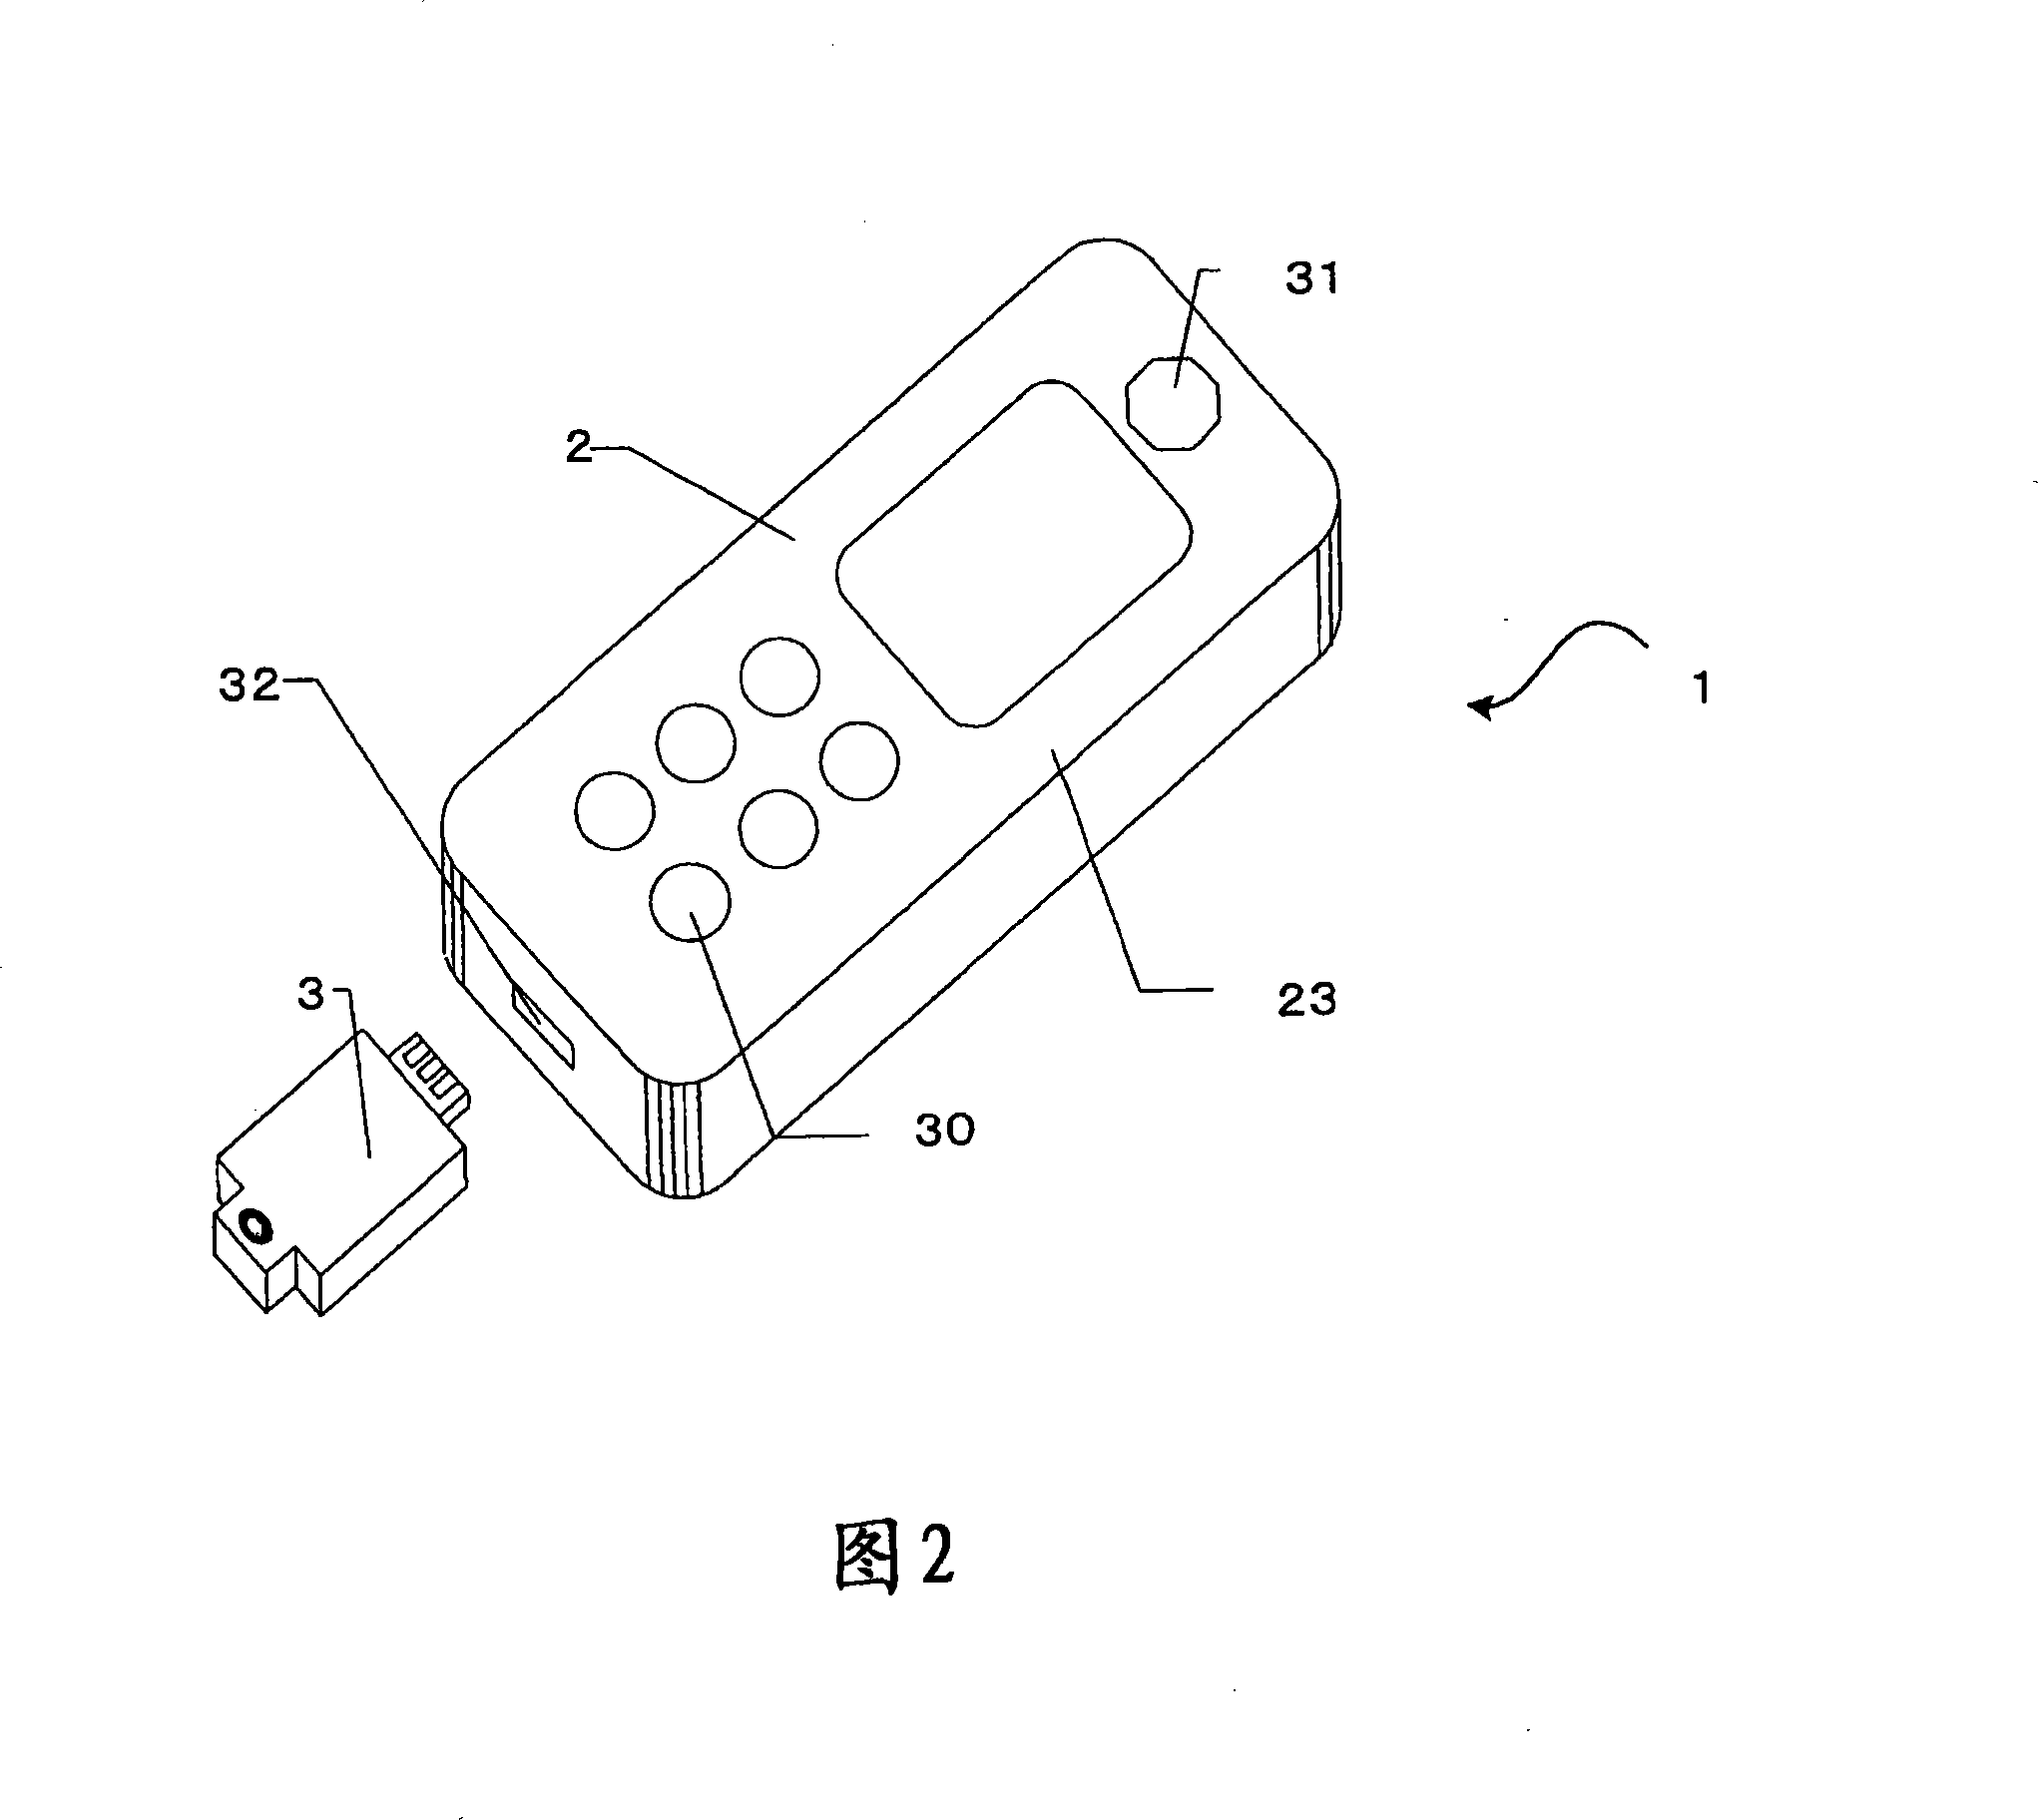 A microchemical analysis device, a micro mixing device, and a microchemical analysis system